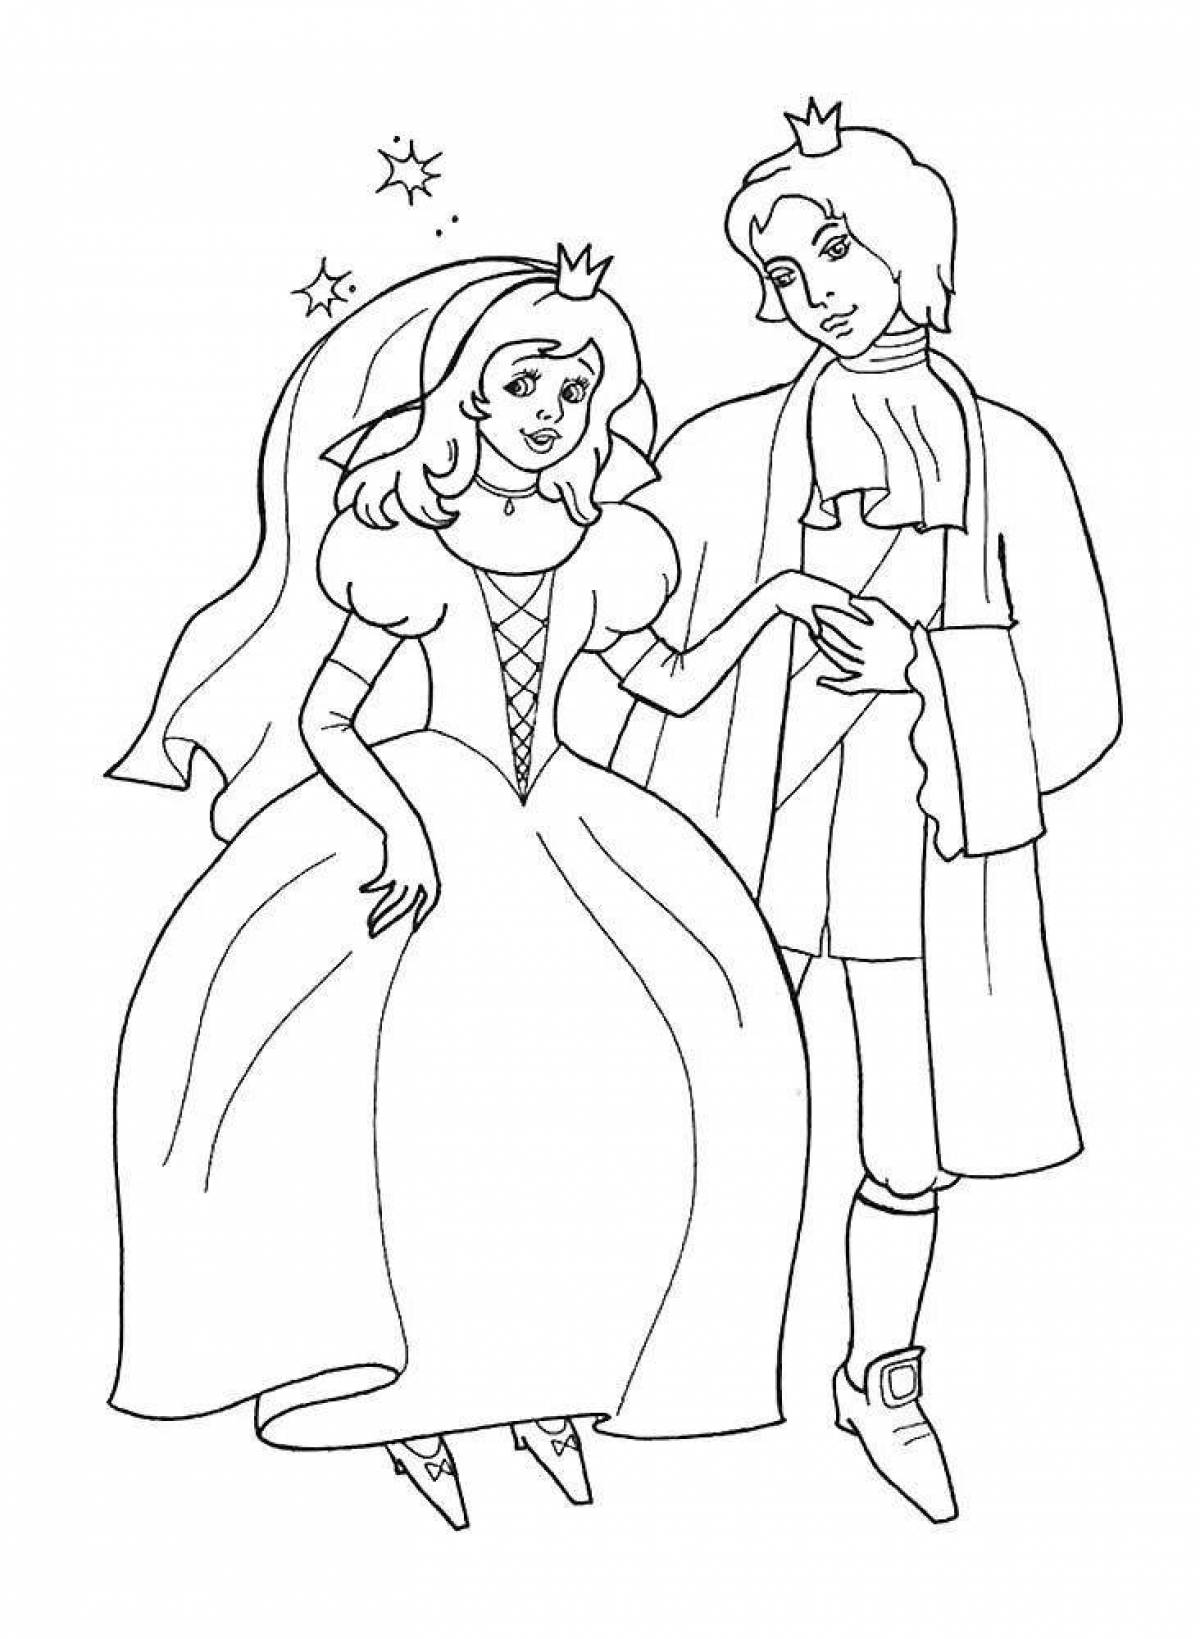 Colouring serene Cinderella and Charles Perrault